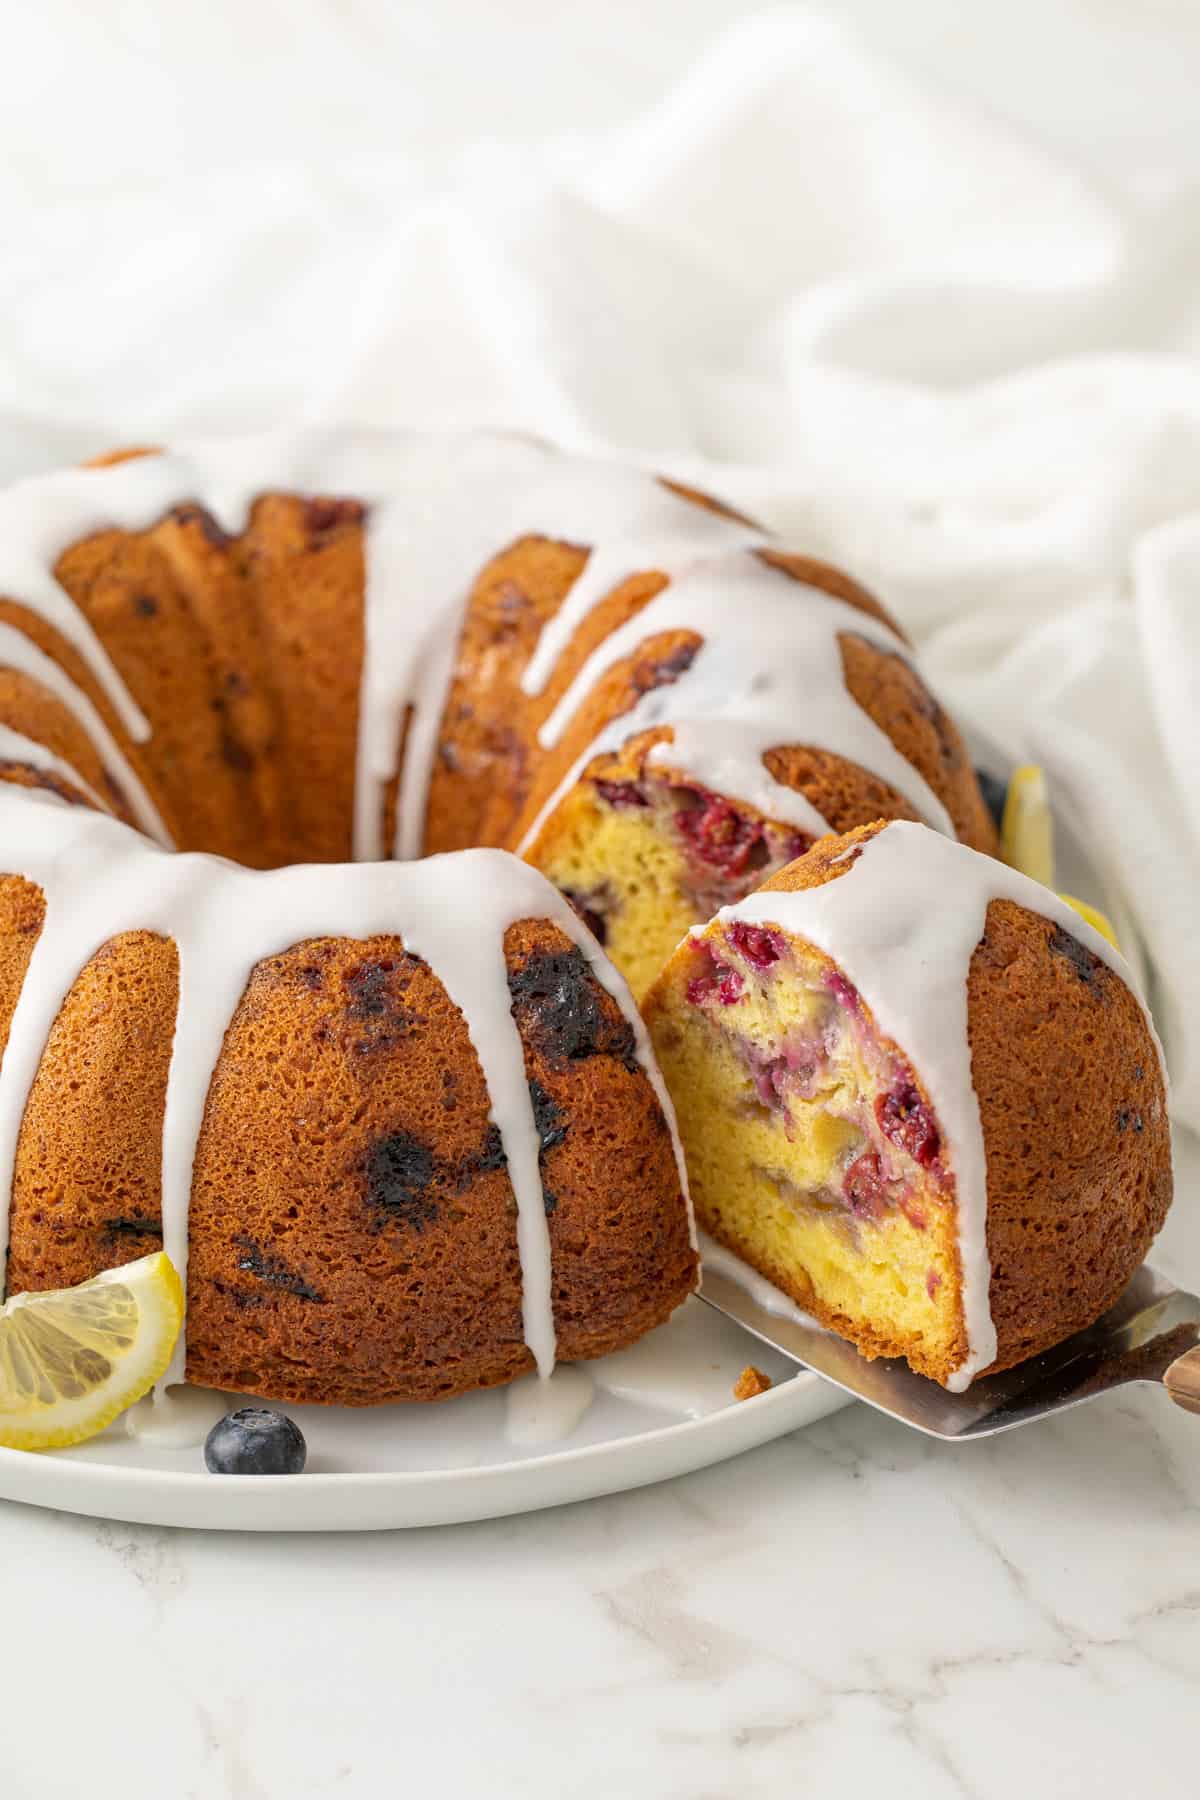 A slice of blueberry lemon Bundt cake being removed with a spatula.